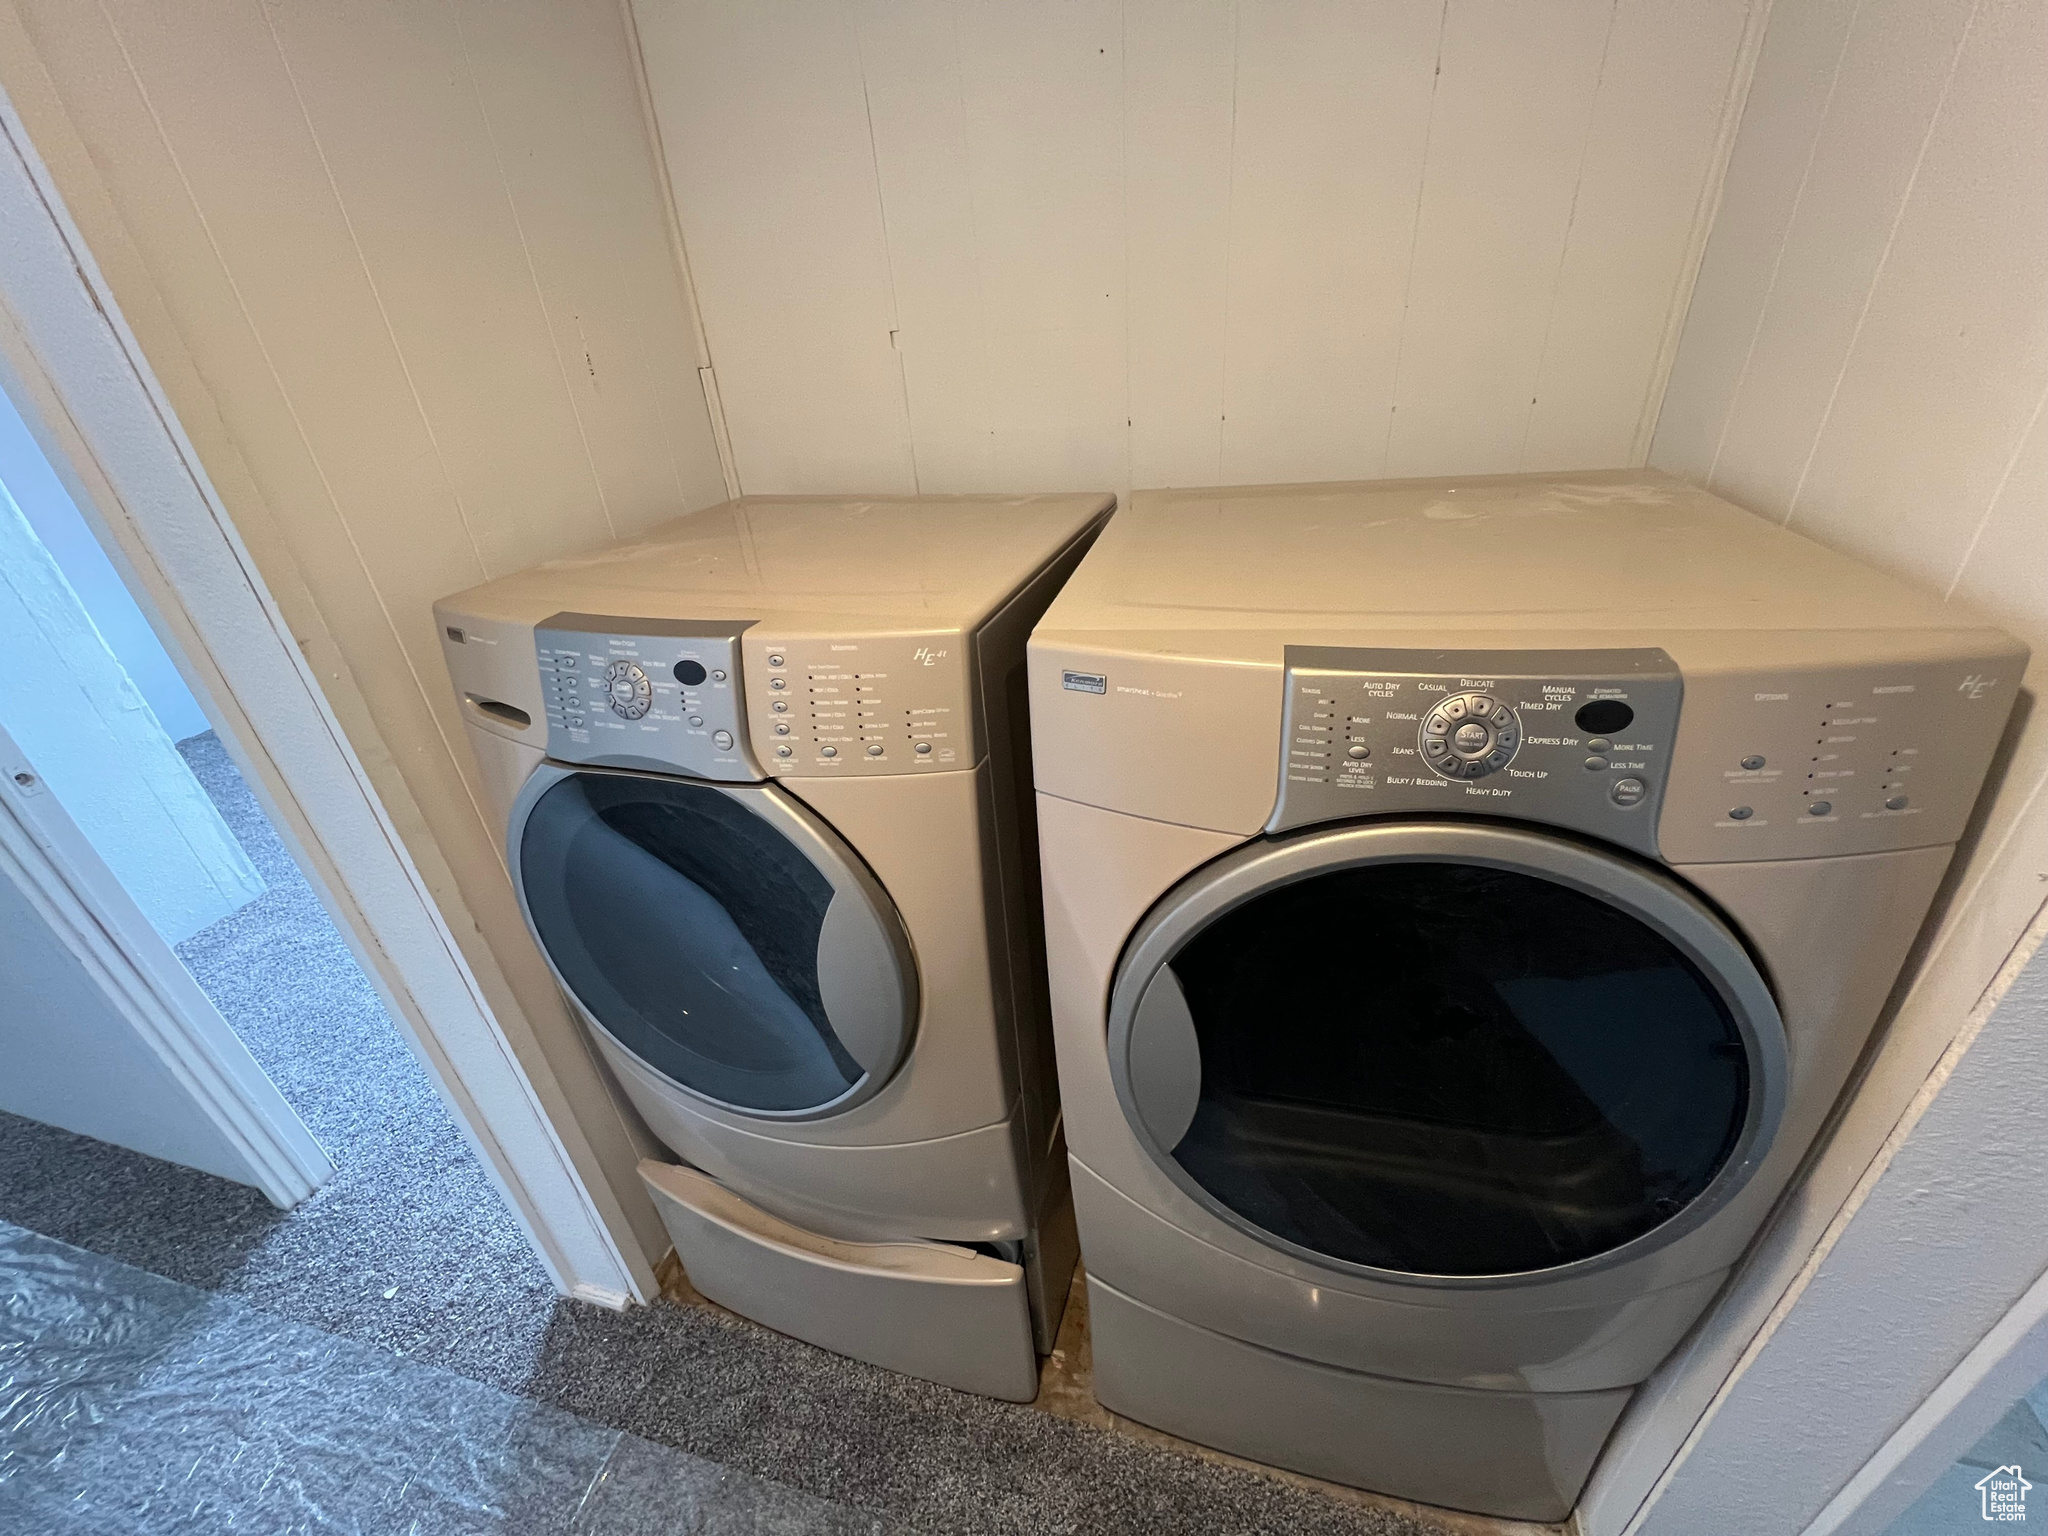 Clothes washing area featuring washer and clothes dryer and tile floors